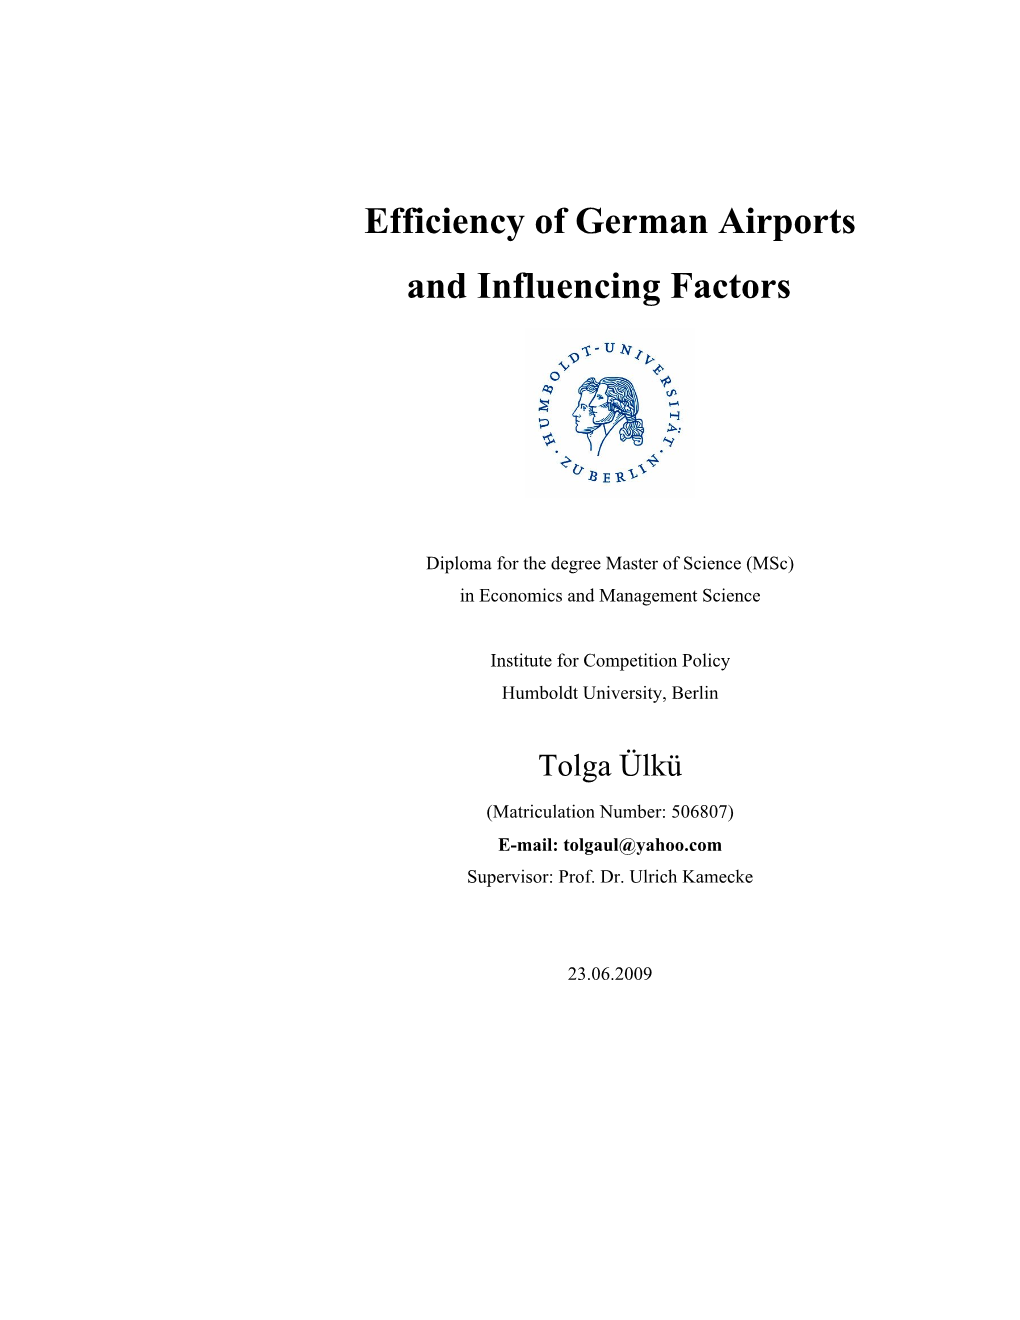 Efficiency of German Airports and Influencing Factors